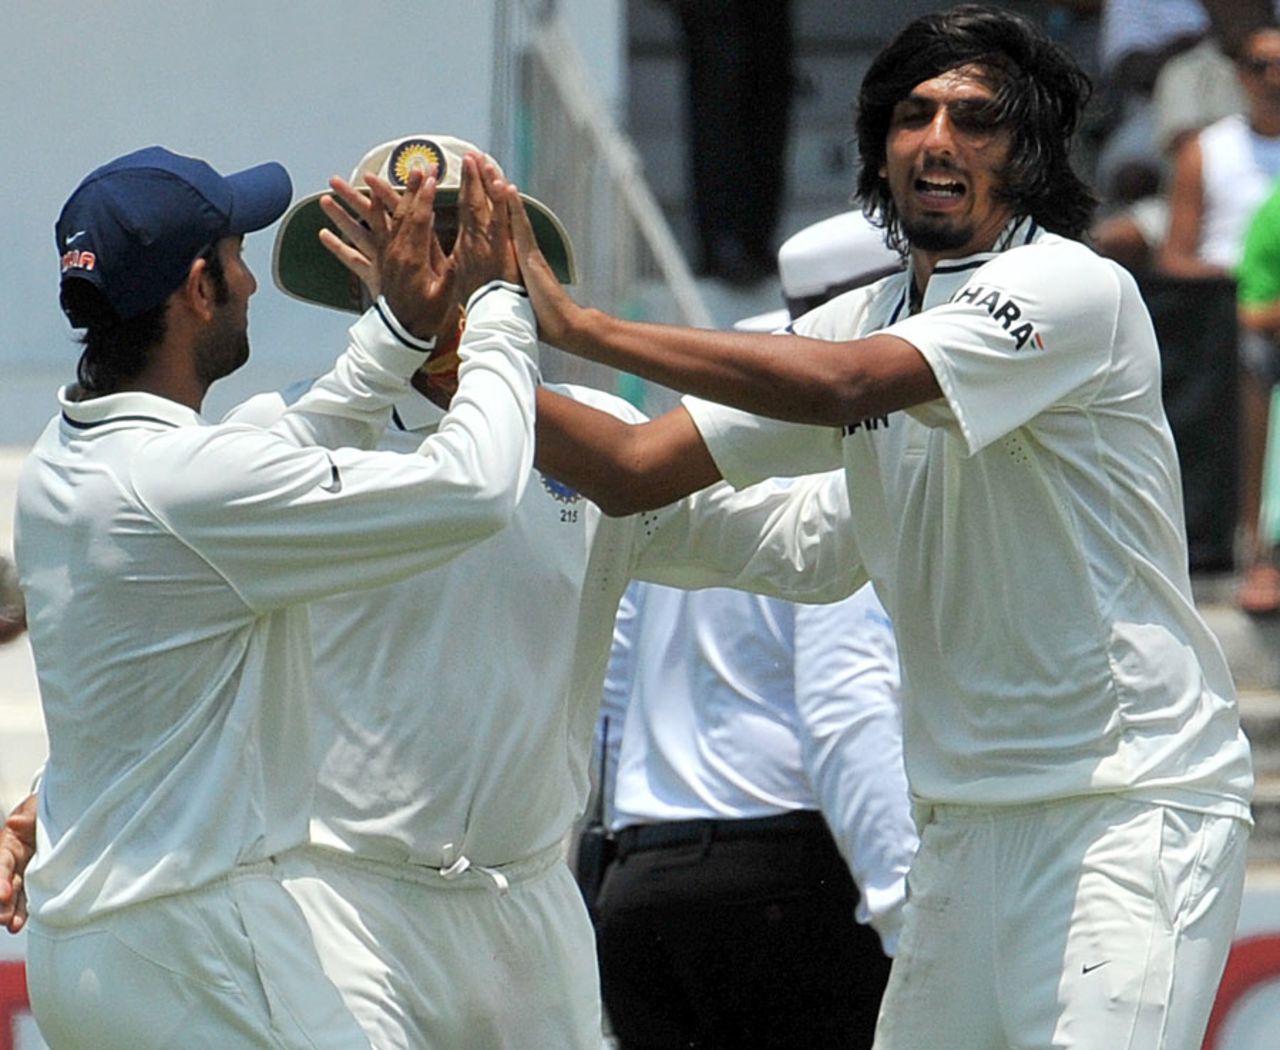 Ishant Sharma is congratulated by Cheteshwar Pujara for running out Jacques Kallis, South Africa v India, 2nd Test, Durban, 2nd day, December 27, 2010 